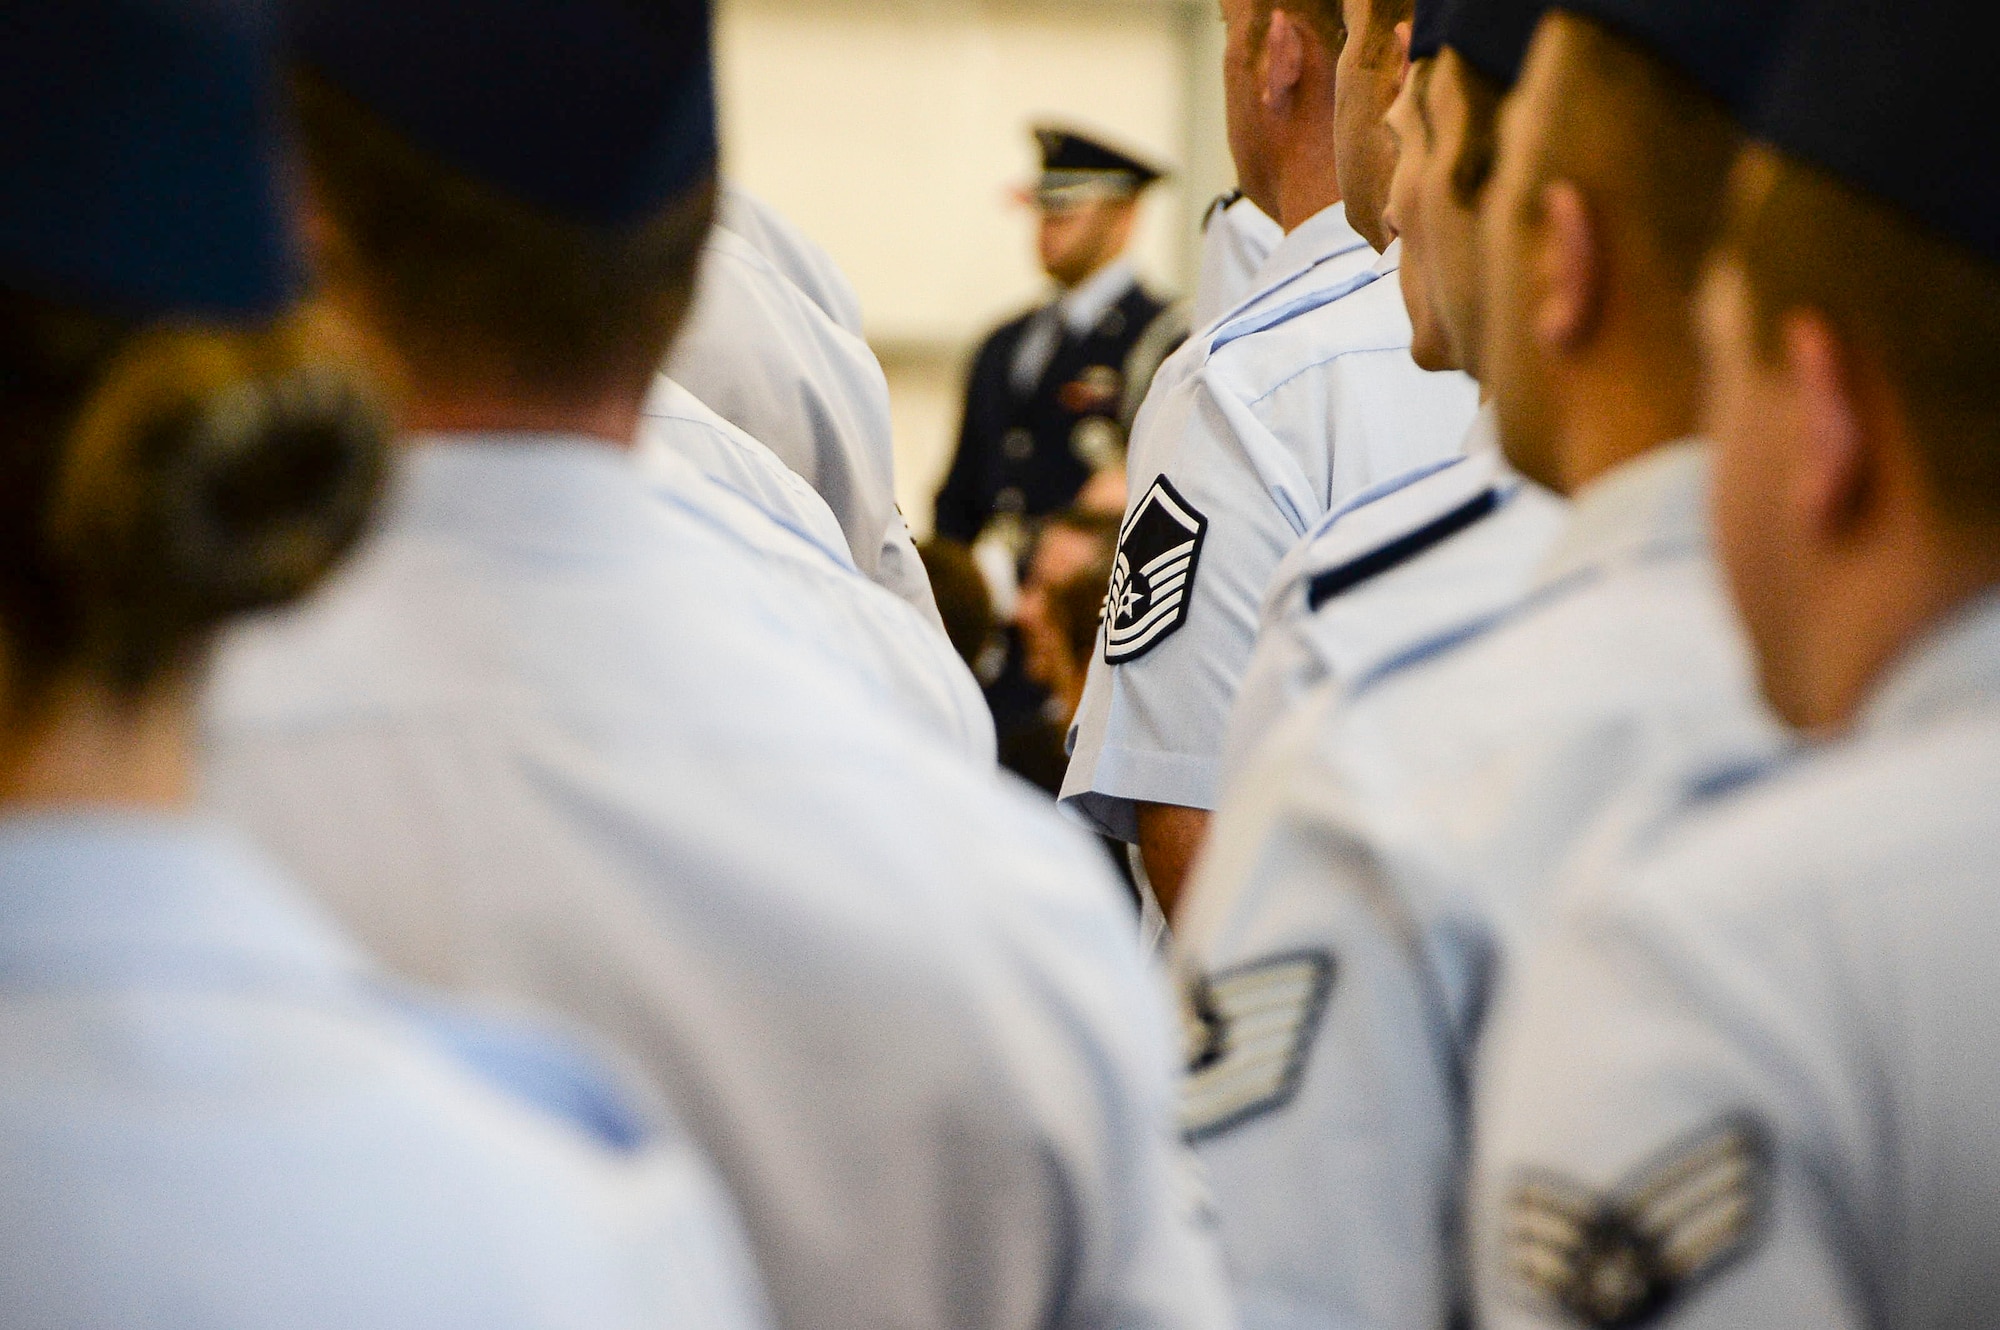 Airmen assigned to 12th Air Force (Air Forces Southern) stand at attention while awaiting the arrival of the official party during the 12th Air Force (Air Forces Southern) change of command ceremony on Davis-Monthan AFB, Ariz., Dec. 19, 2014. Lt. Gen. Tod Wolters relinquished command to Lt. Gen. Chris Nowland. (U.S. Air Force photo by Staff Sgt. Adam Grant/Released)